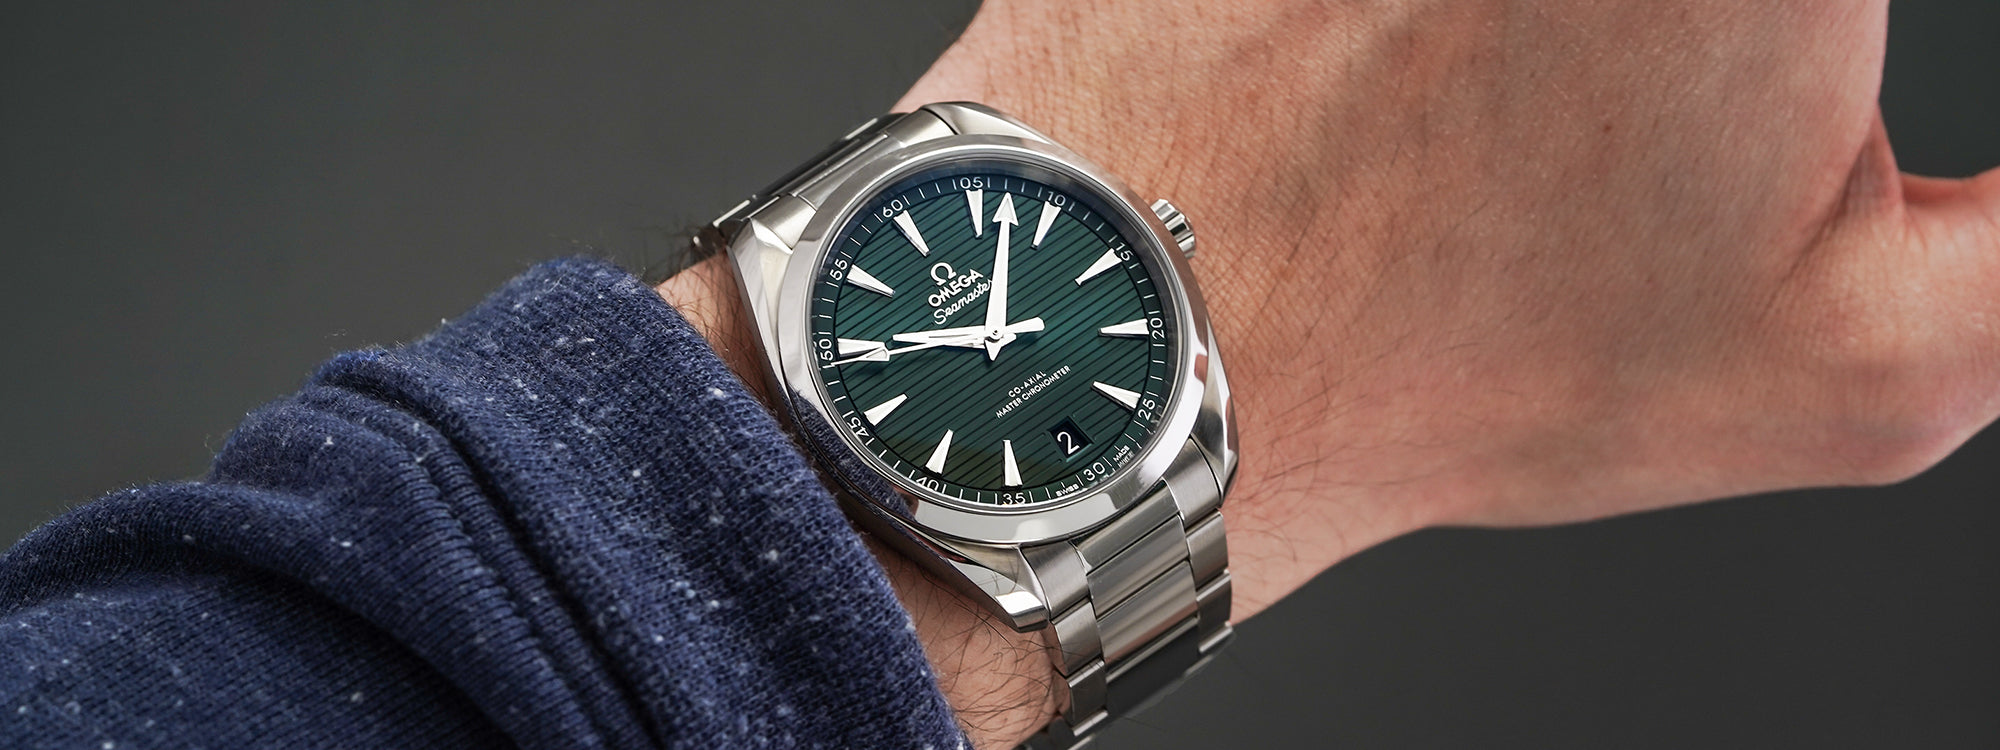 What to Know Before Buying the Omega Aqua Terra | Teddy Baldassarre